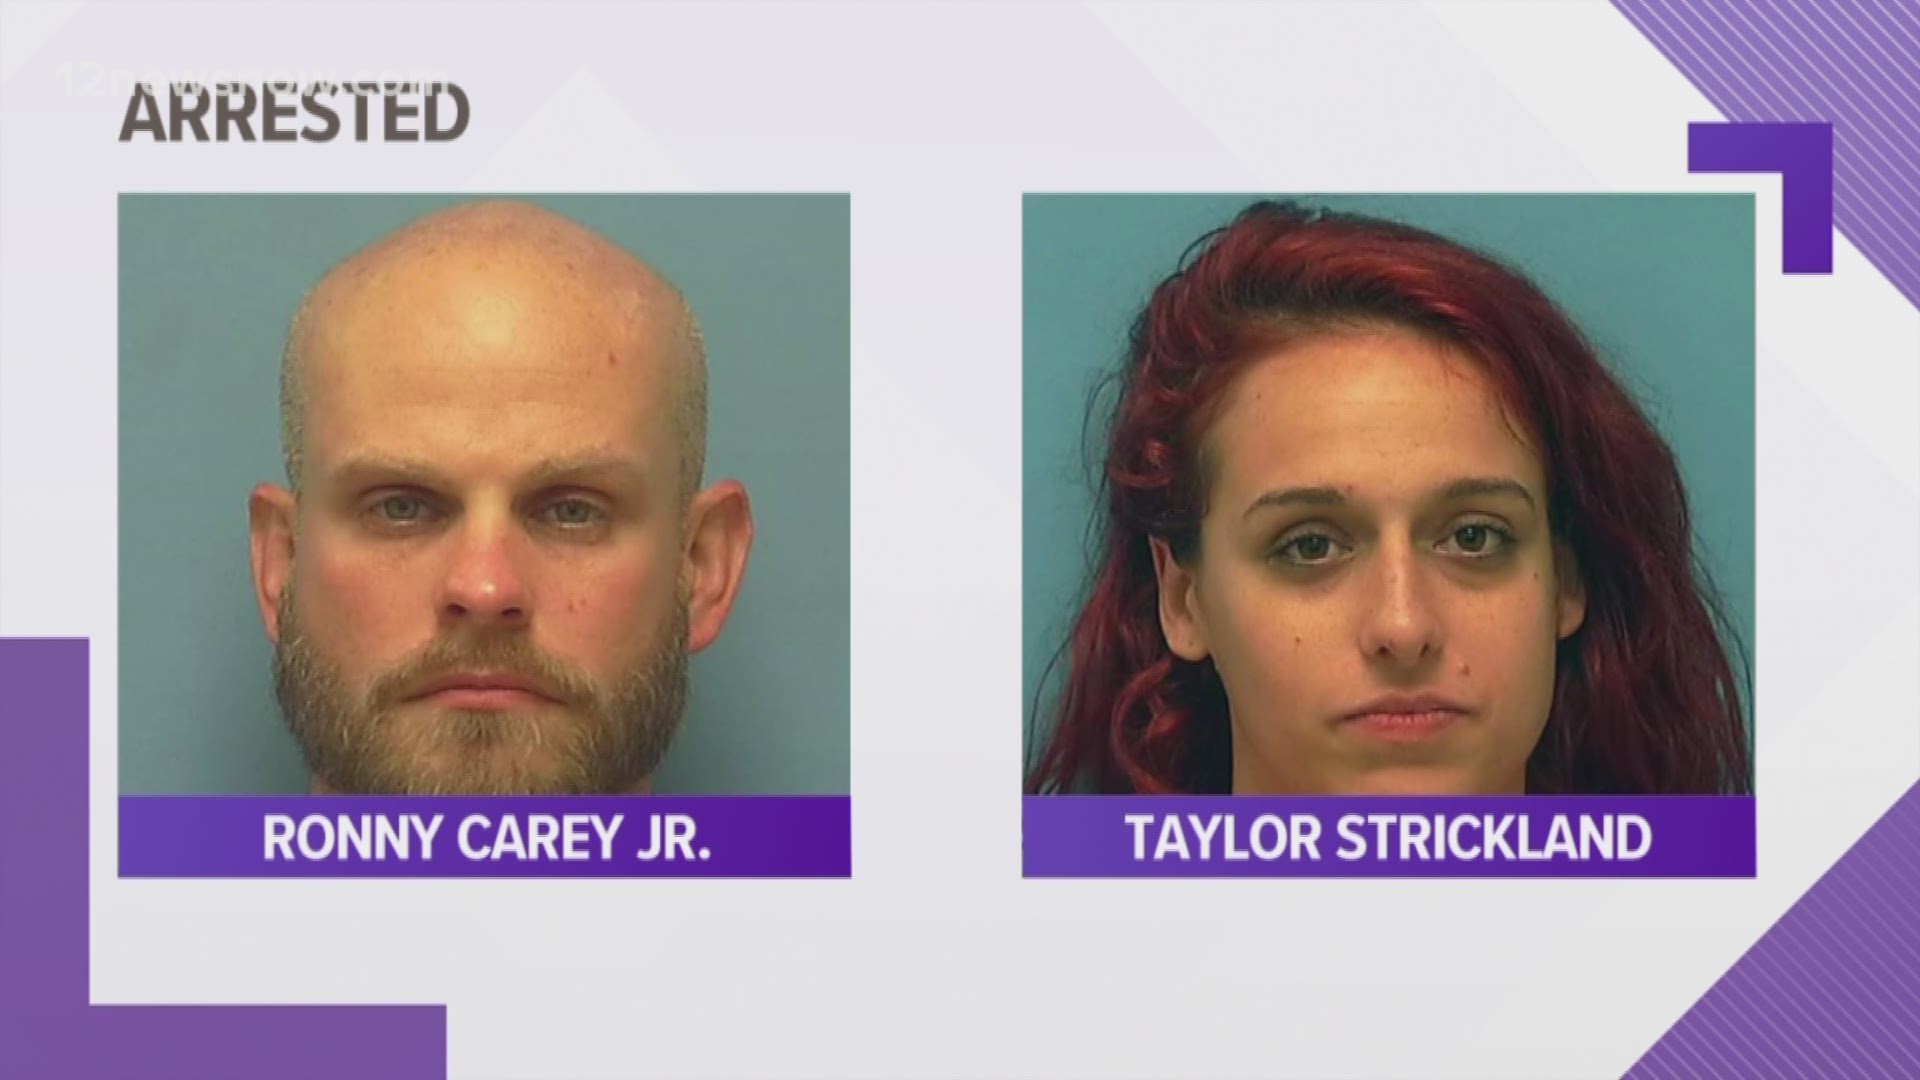 Ronny Carey Jr. is charged with murder. Taylor Strickland was arrested on Thursday